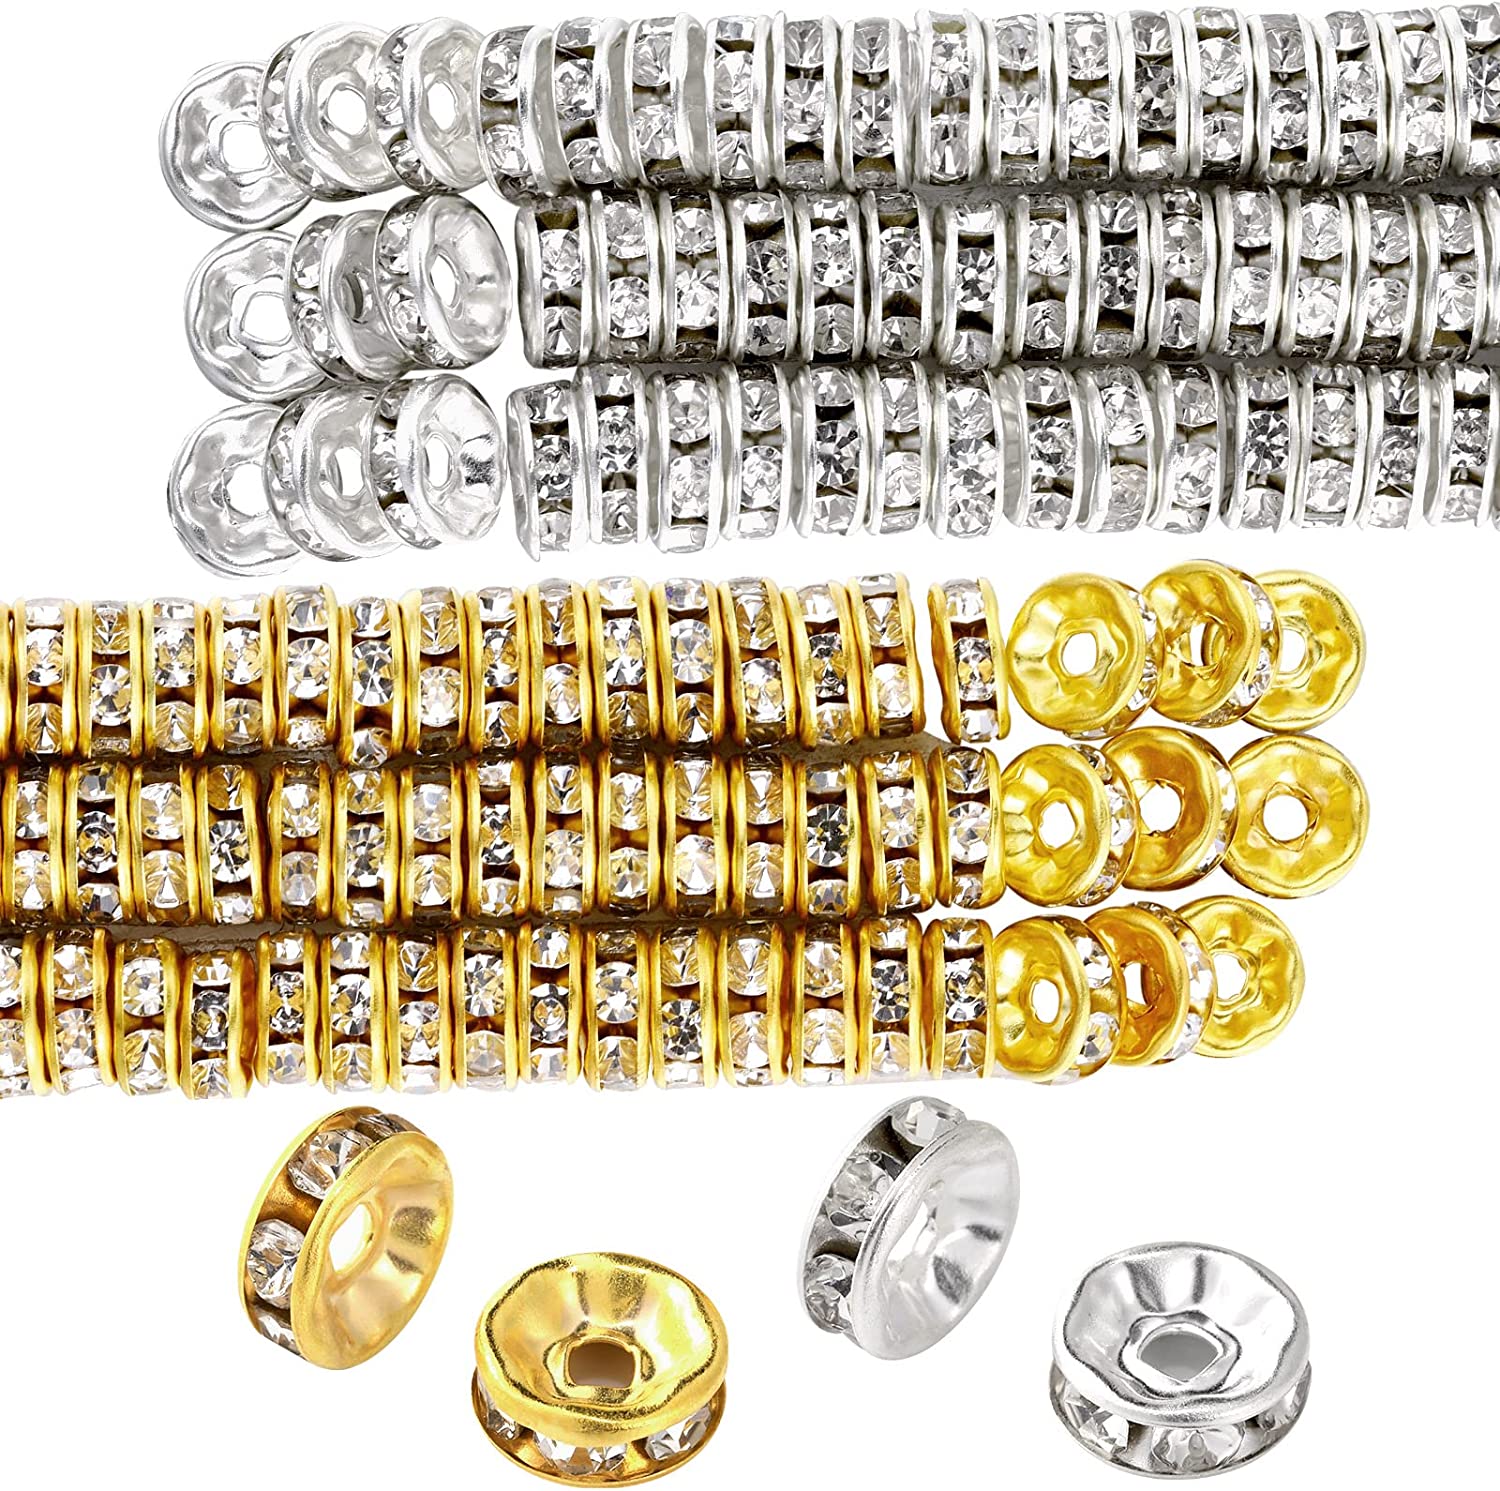 800 Pieces 8mm Round Rondelle Spacer Beads Crystal Rhinestone Loose Bead  Charm Beads Spacer Bead for Jewelry Making (Gold, Silver,8 mm)